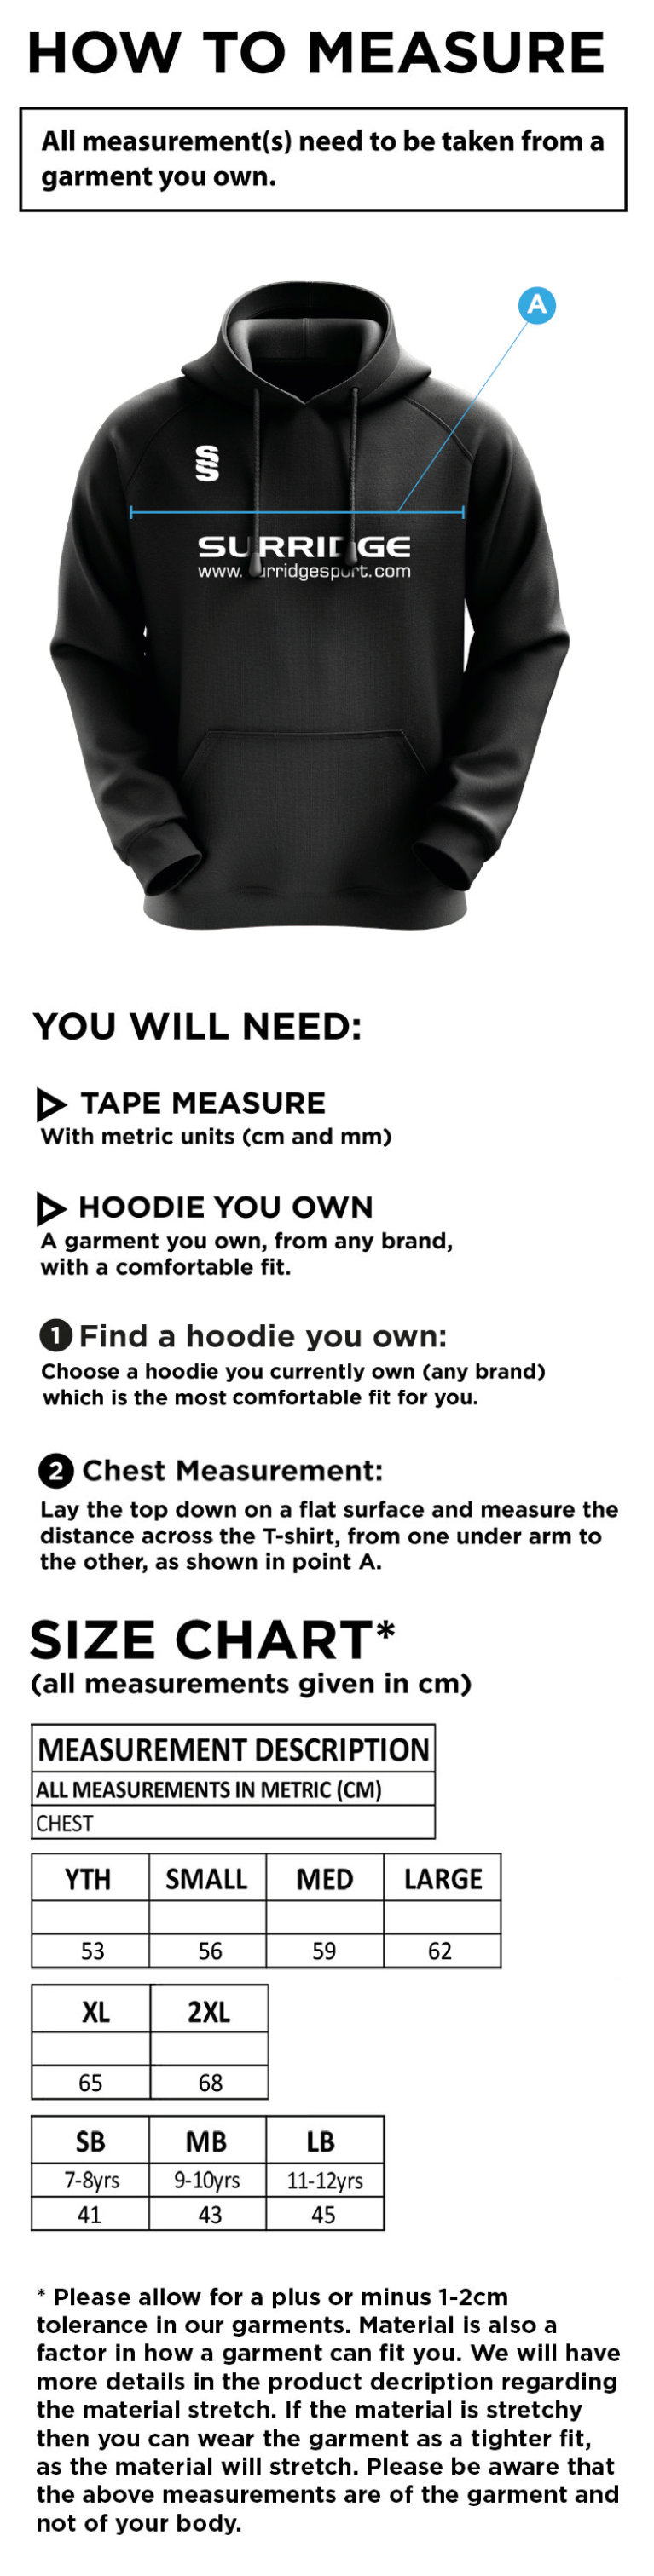 Porchfield CC - Blade Hoody - Size Guide